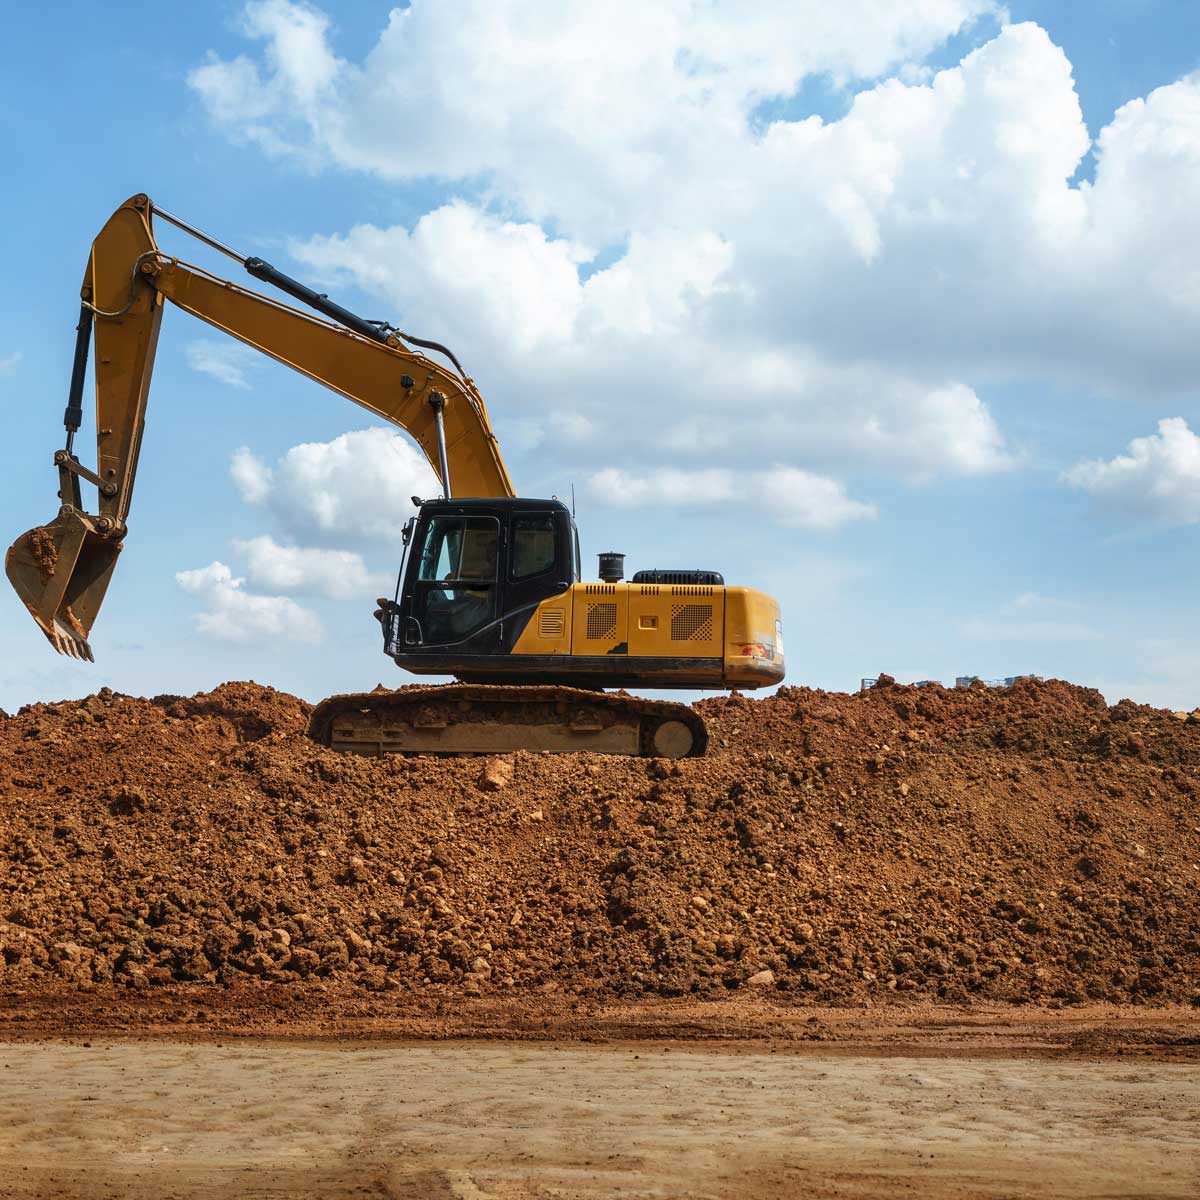 Panorama of Excavator with blue sky